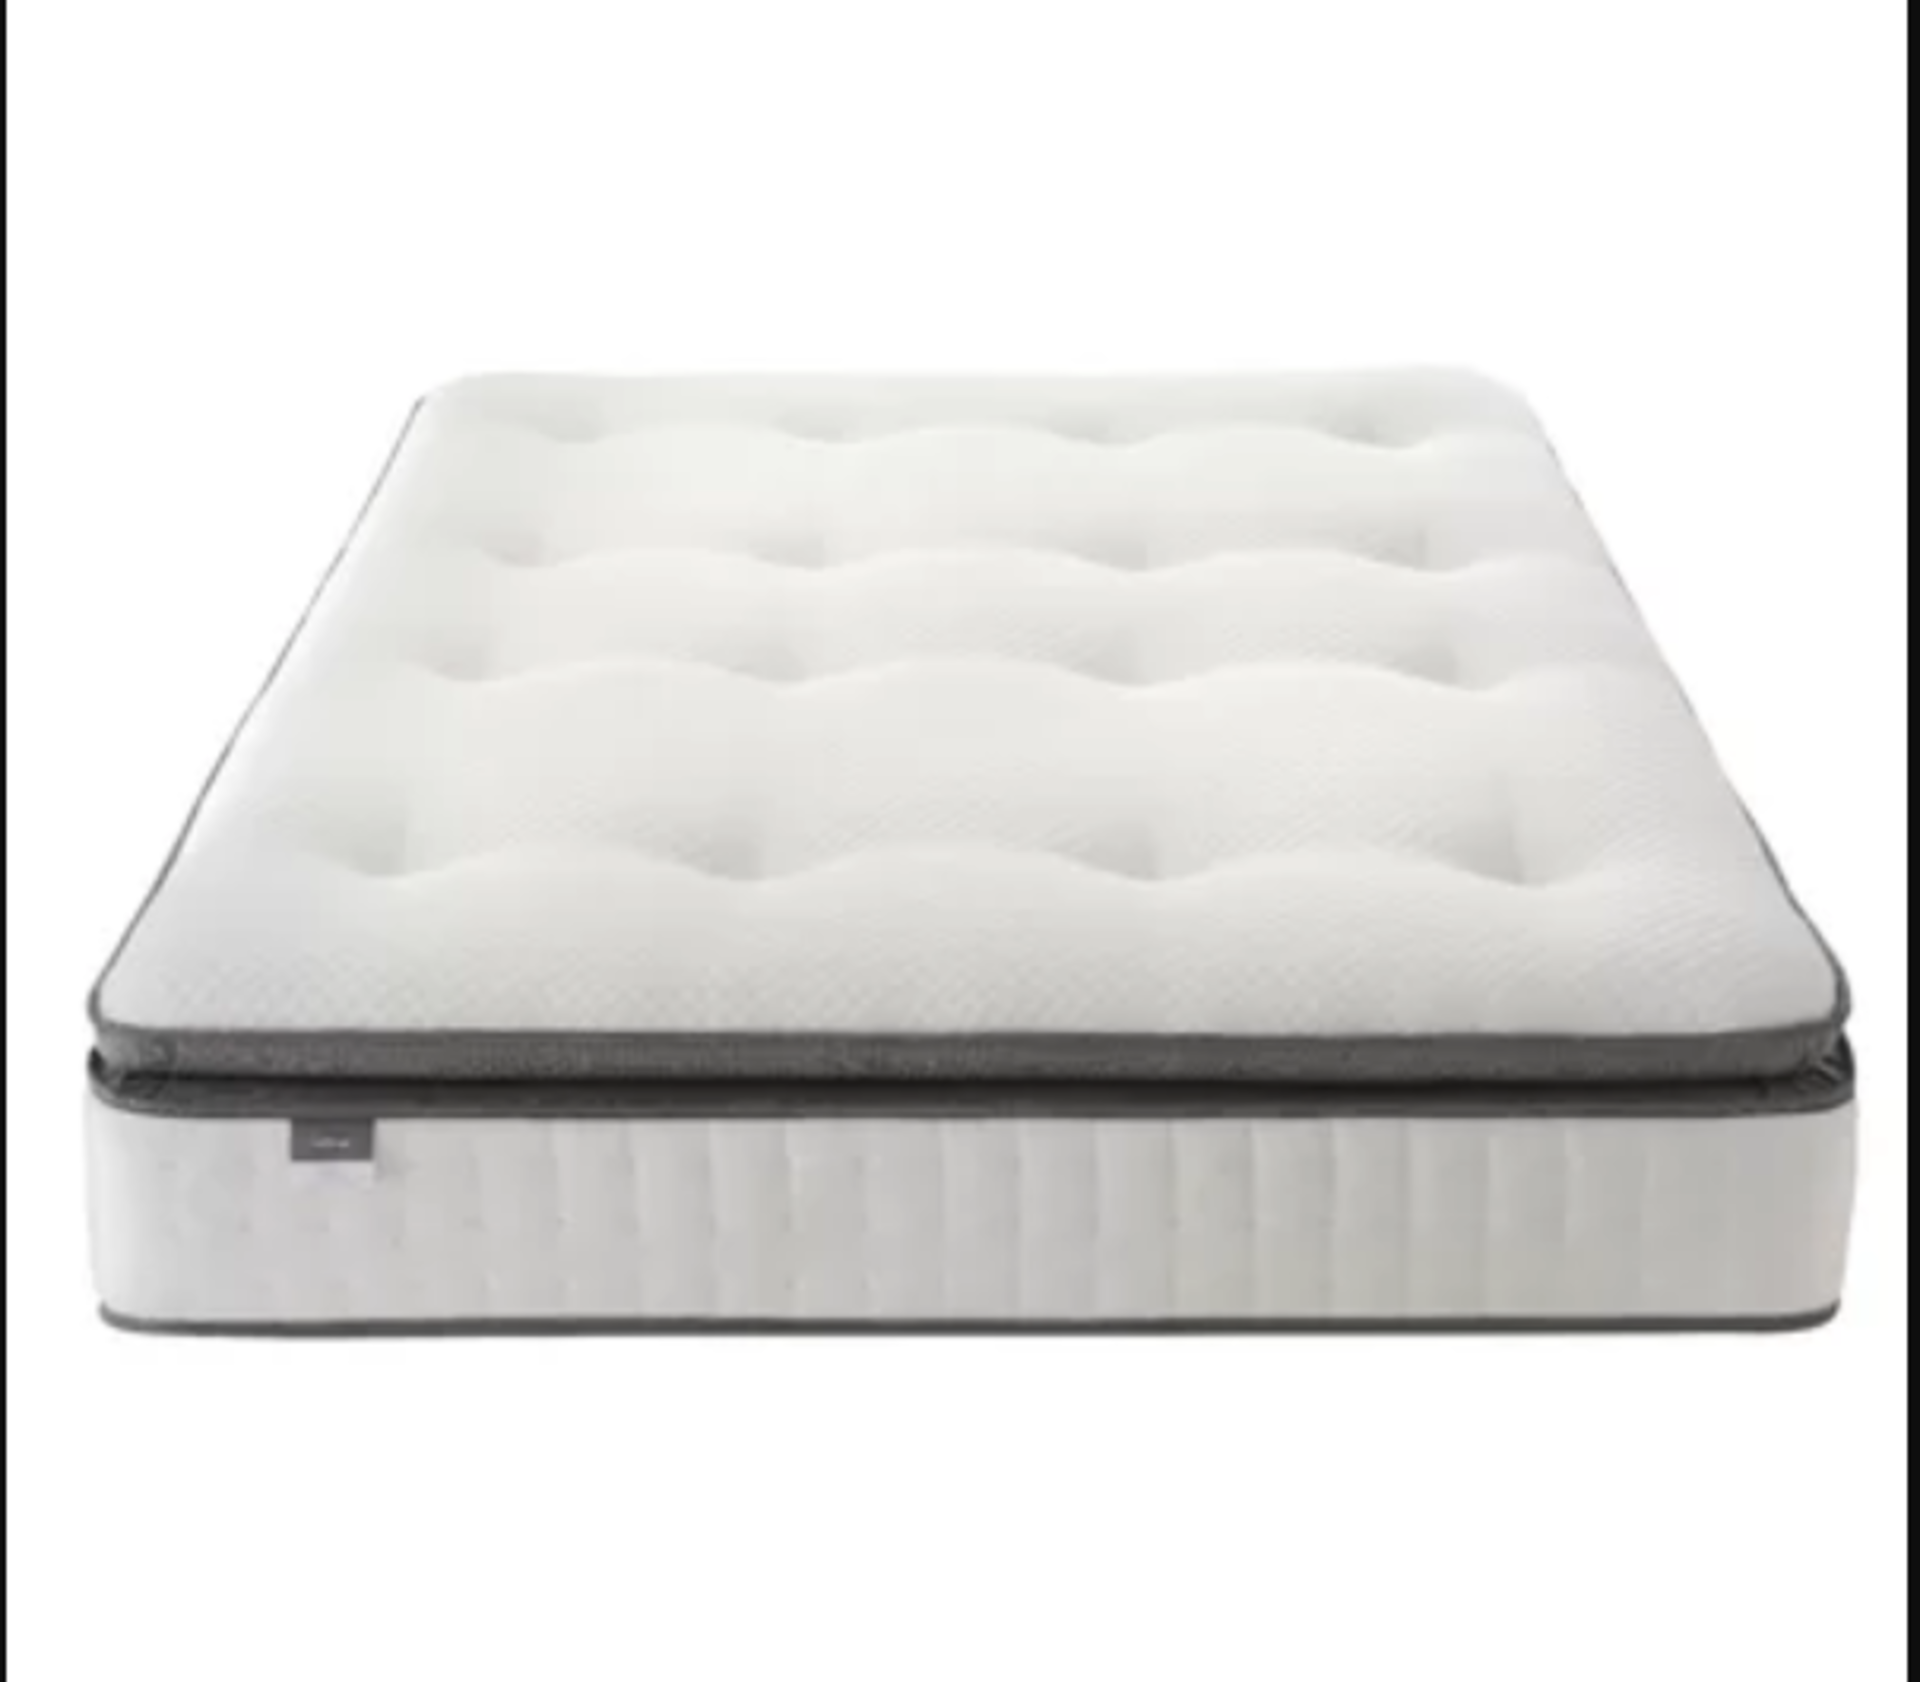 White Noise Serenity Hybrid Coil and Memory Foam Mattress. 135x190cm. This hybrid coil spring